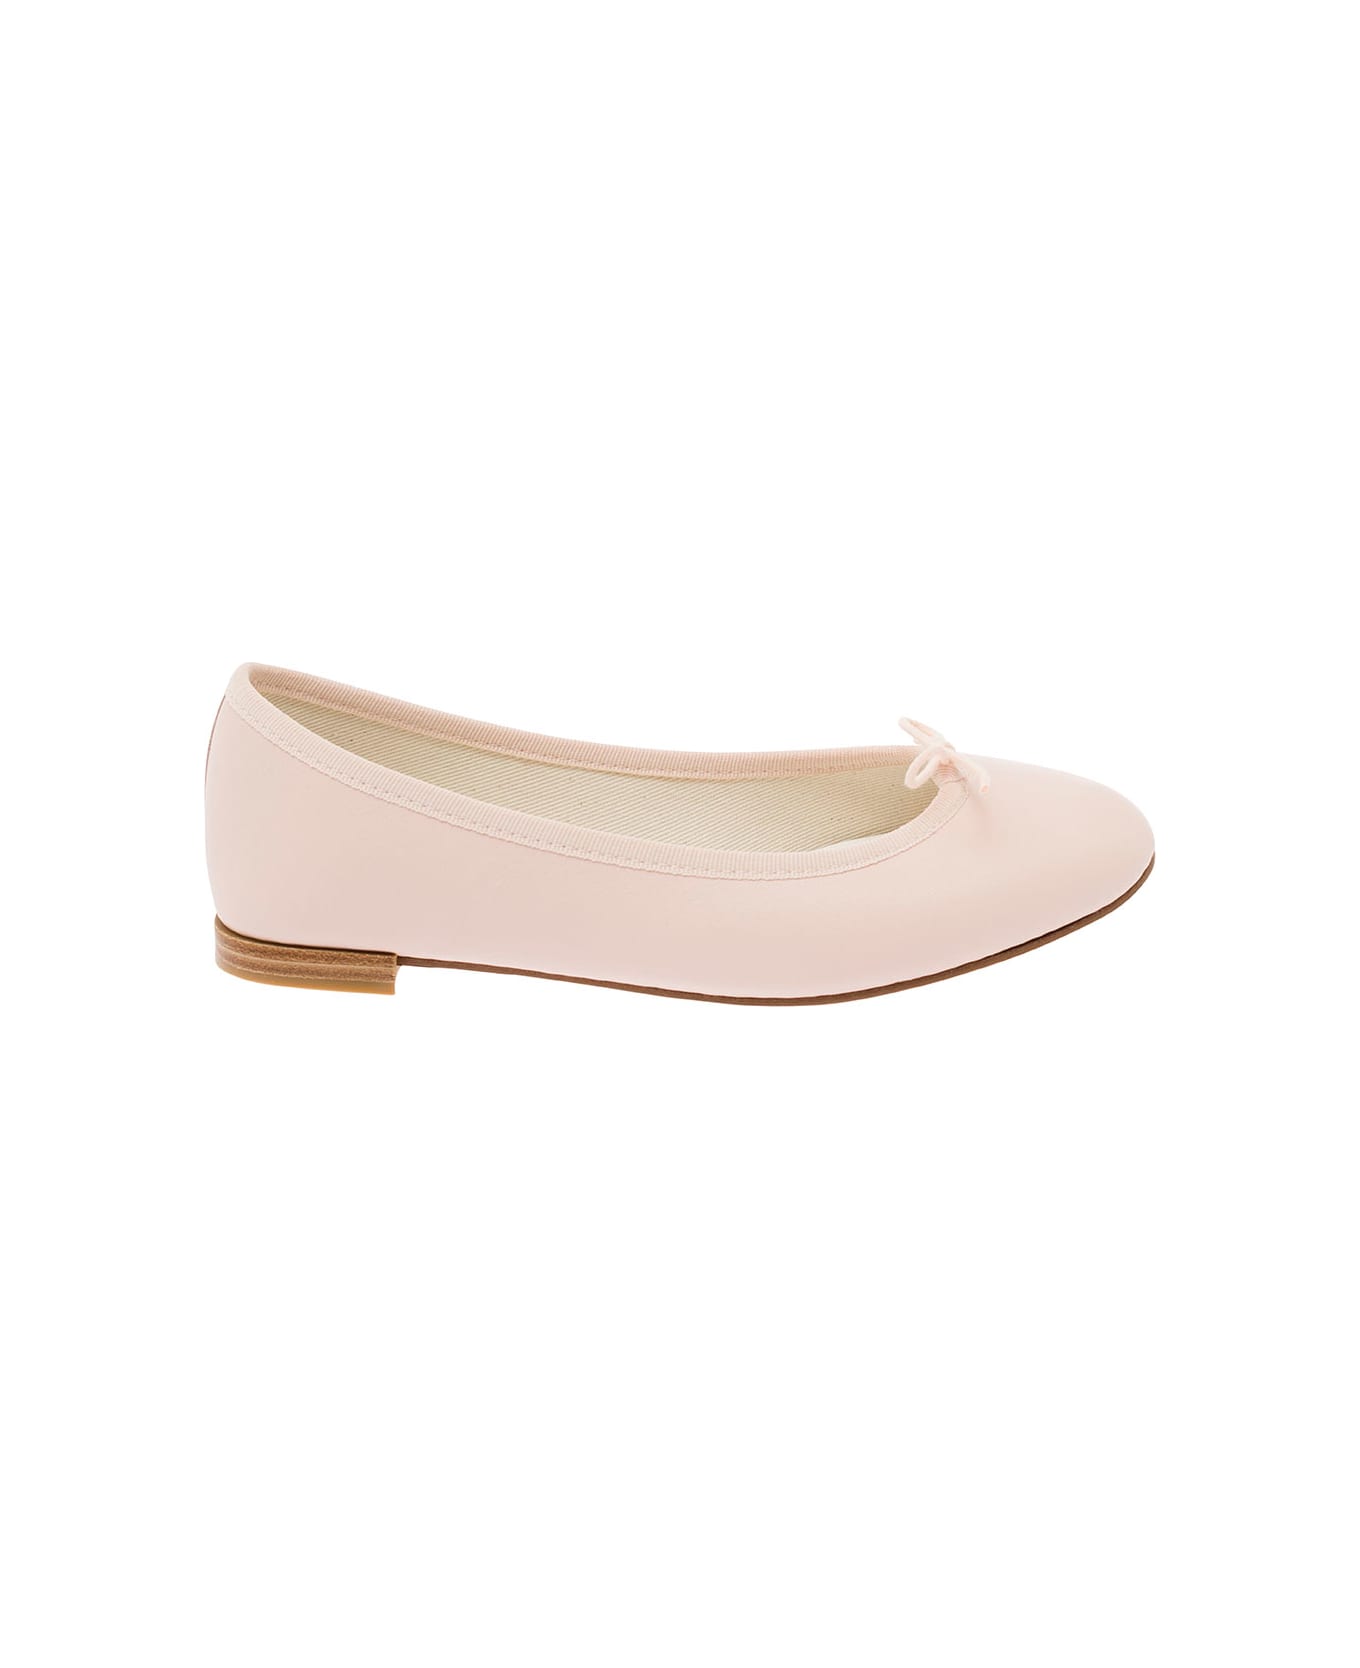 Repetto 'cendrillon' Pink Ballet Flats With Bow Detail In Smooth Leather Woman - Pink フラットシューズ